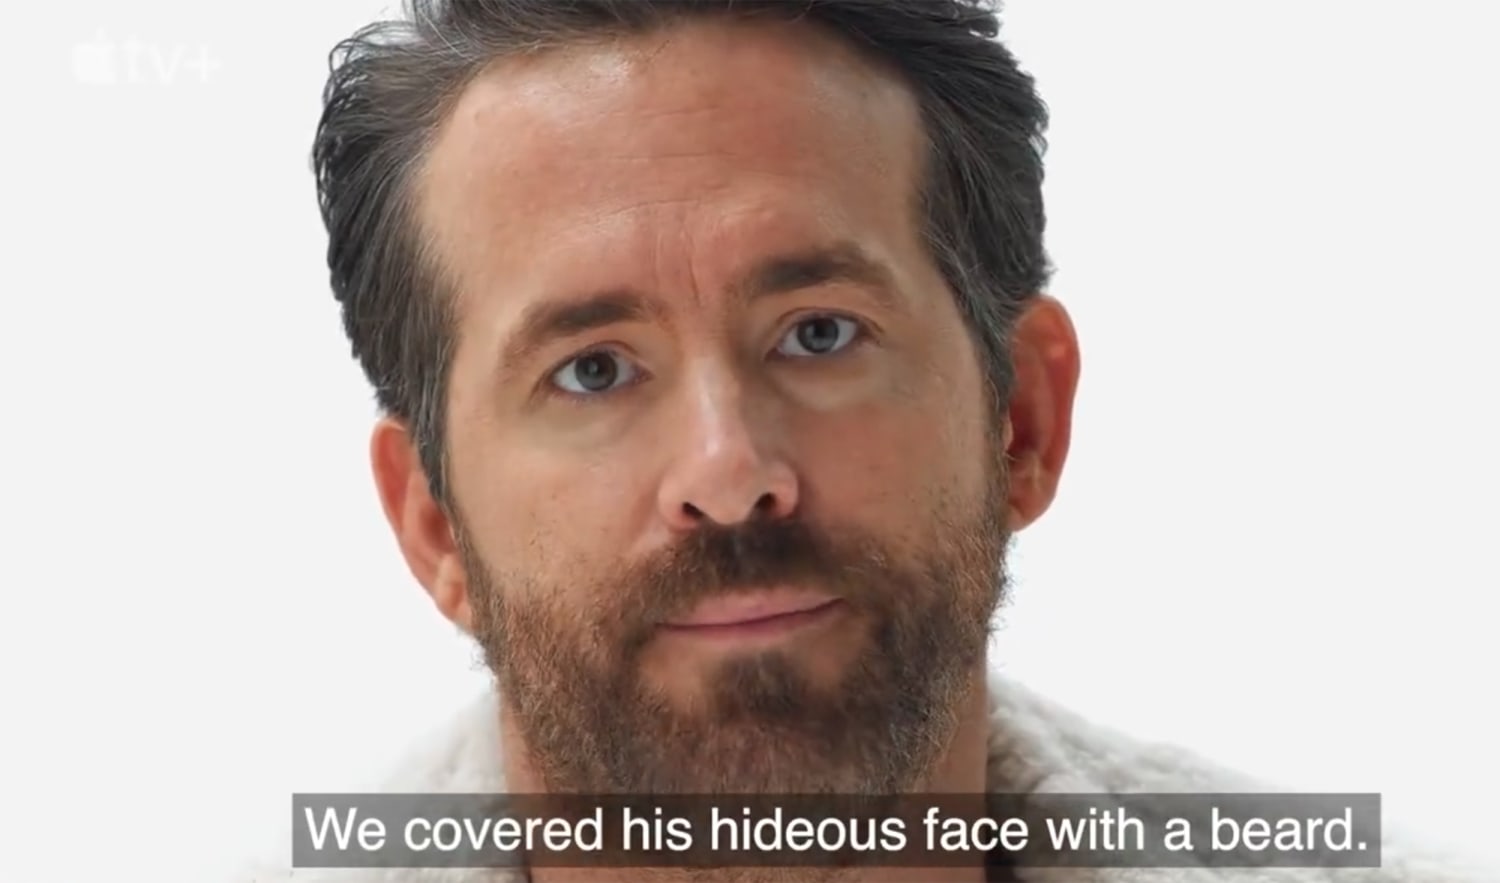 Ryan Reynolds Gets Upgrade by Will Ferrell, Octavia Spencer in Hilarious Ad